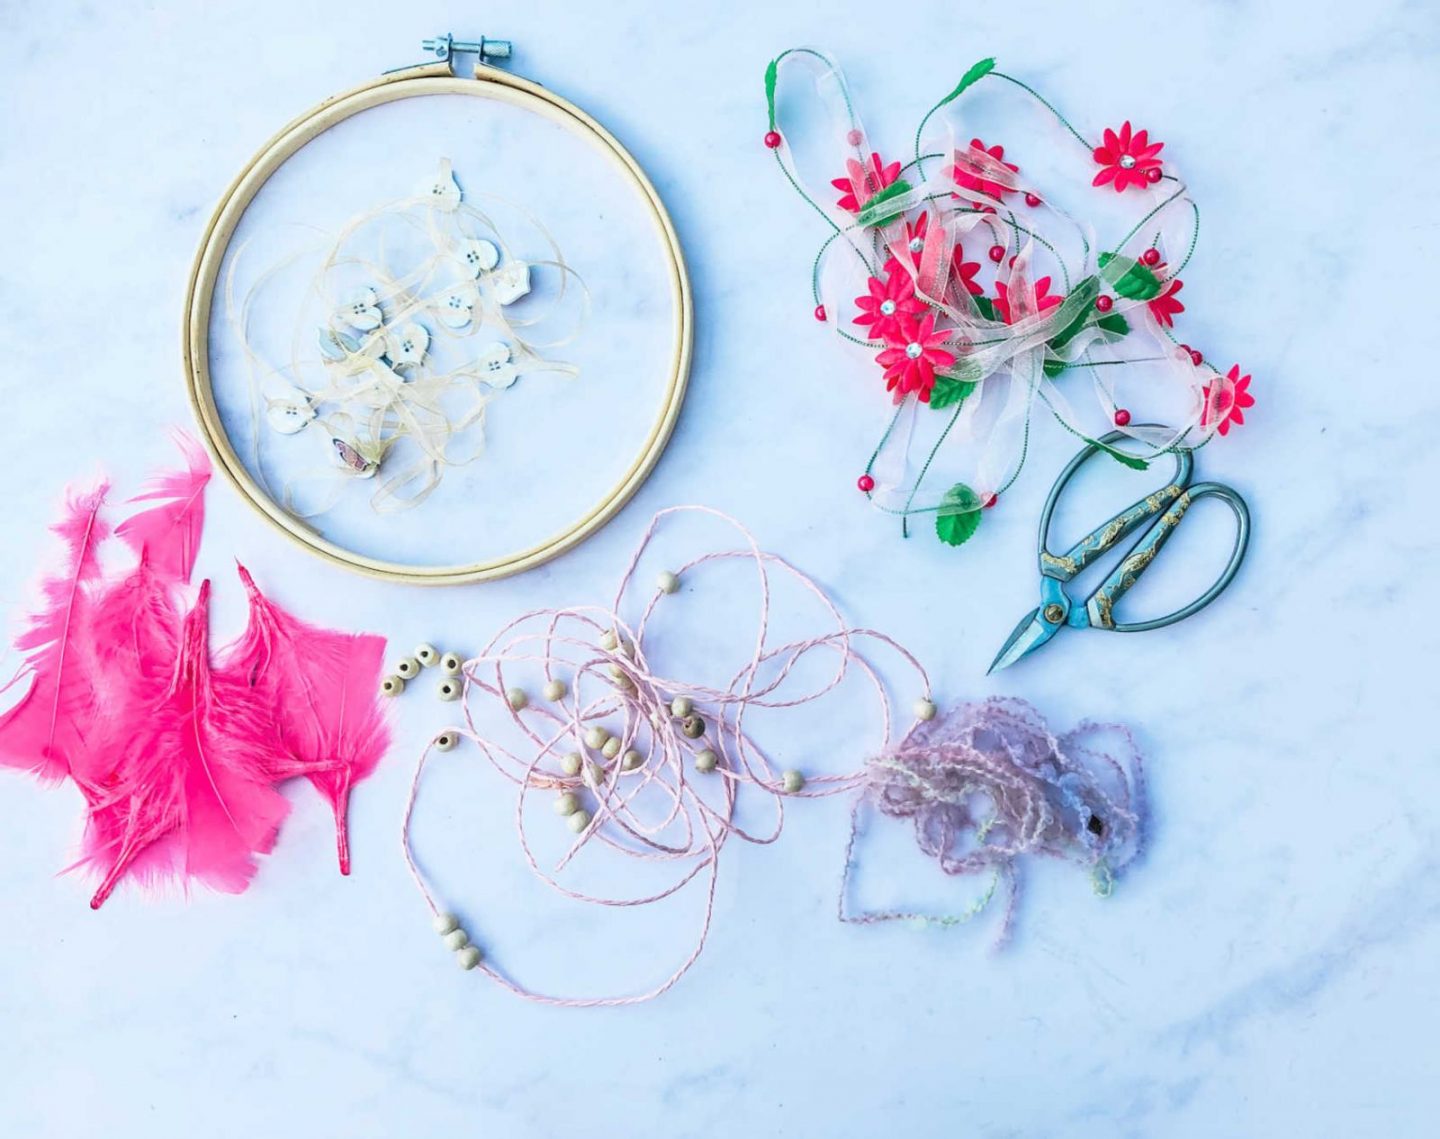 What you need to make a dreamcatcher